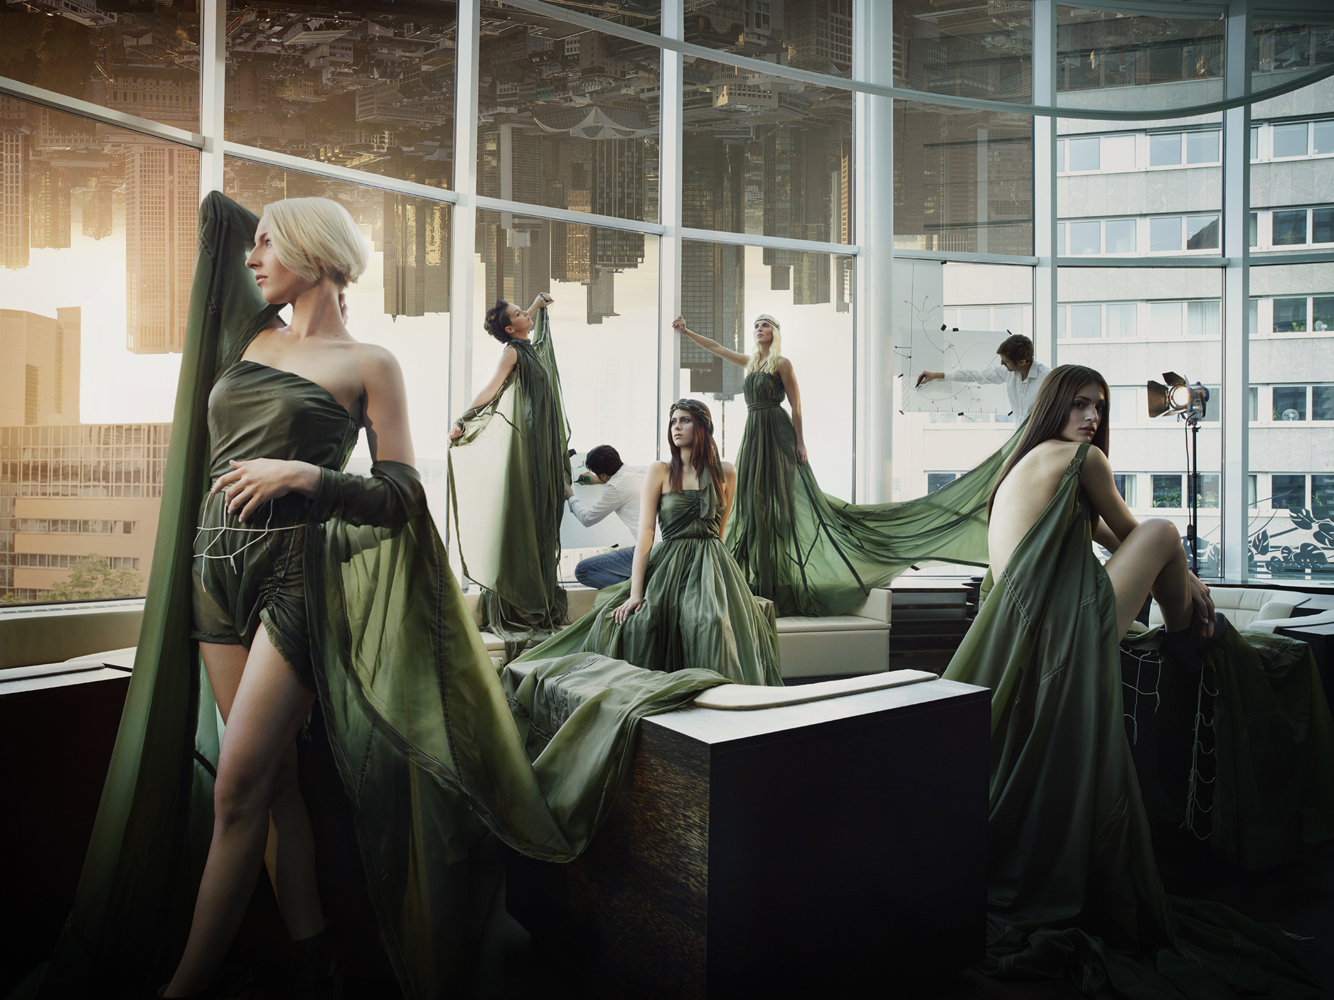 Fairy models in office with city background - Inkognito conceptual photography